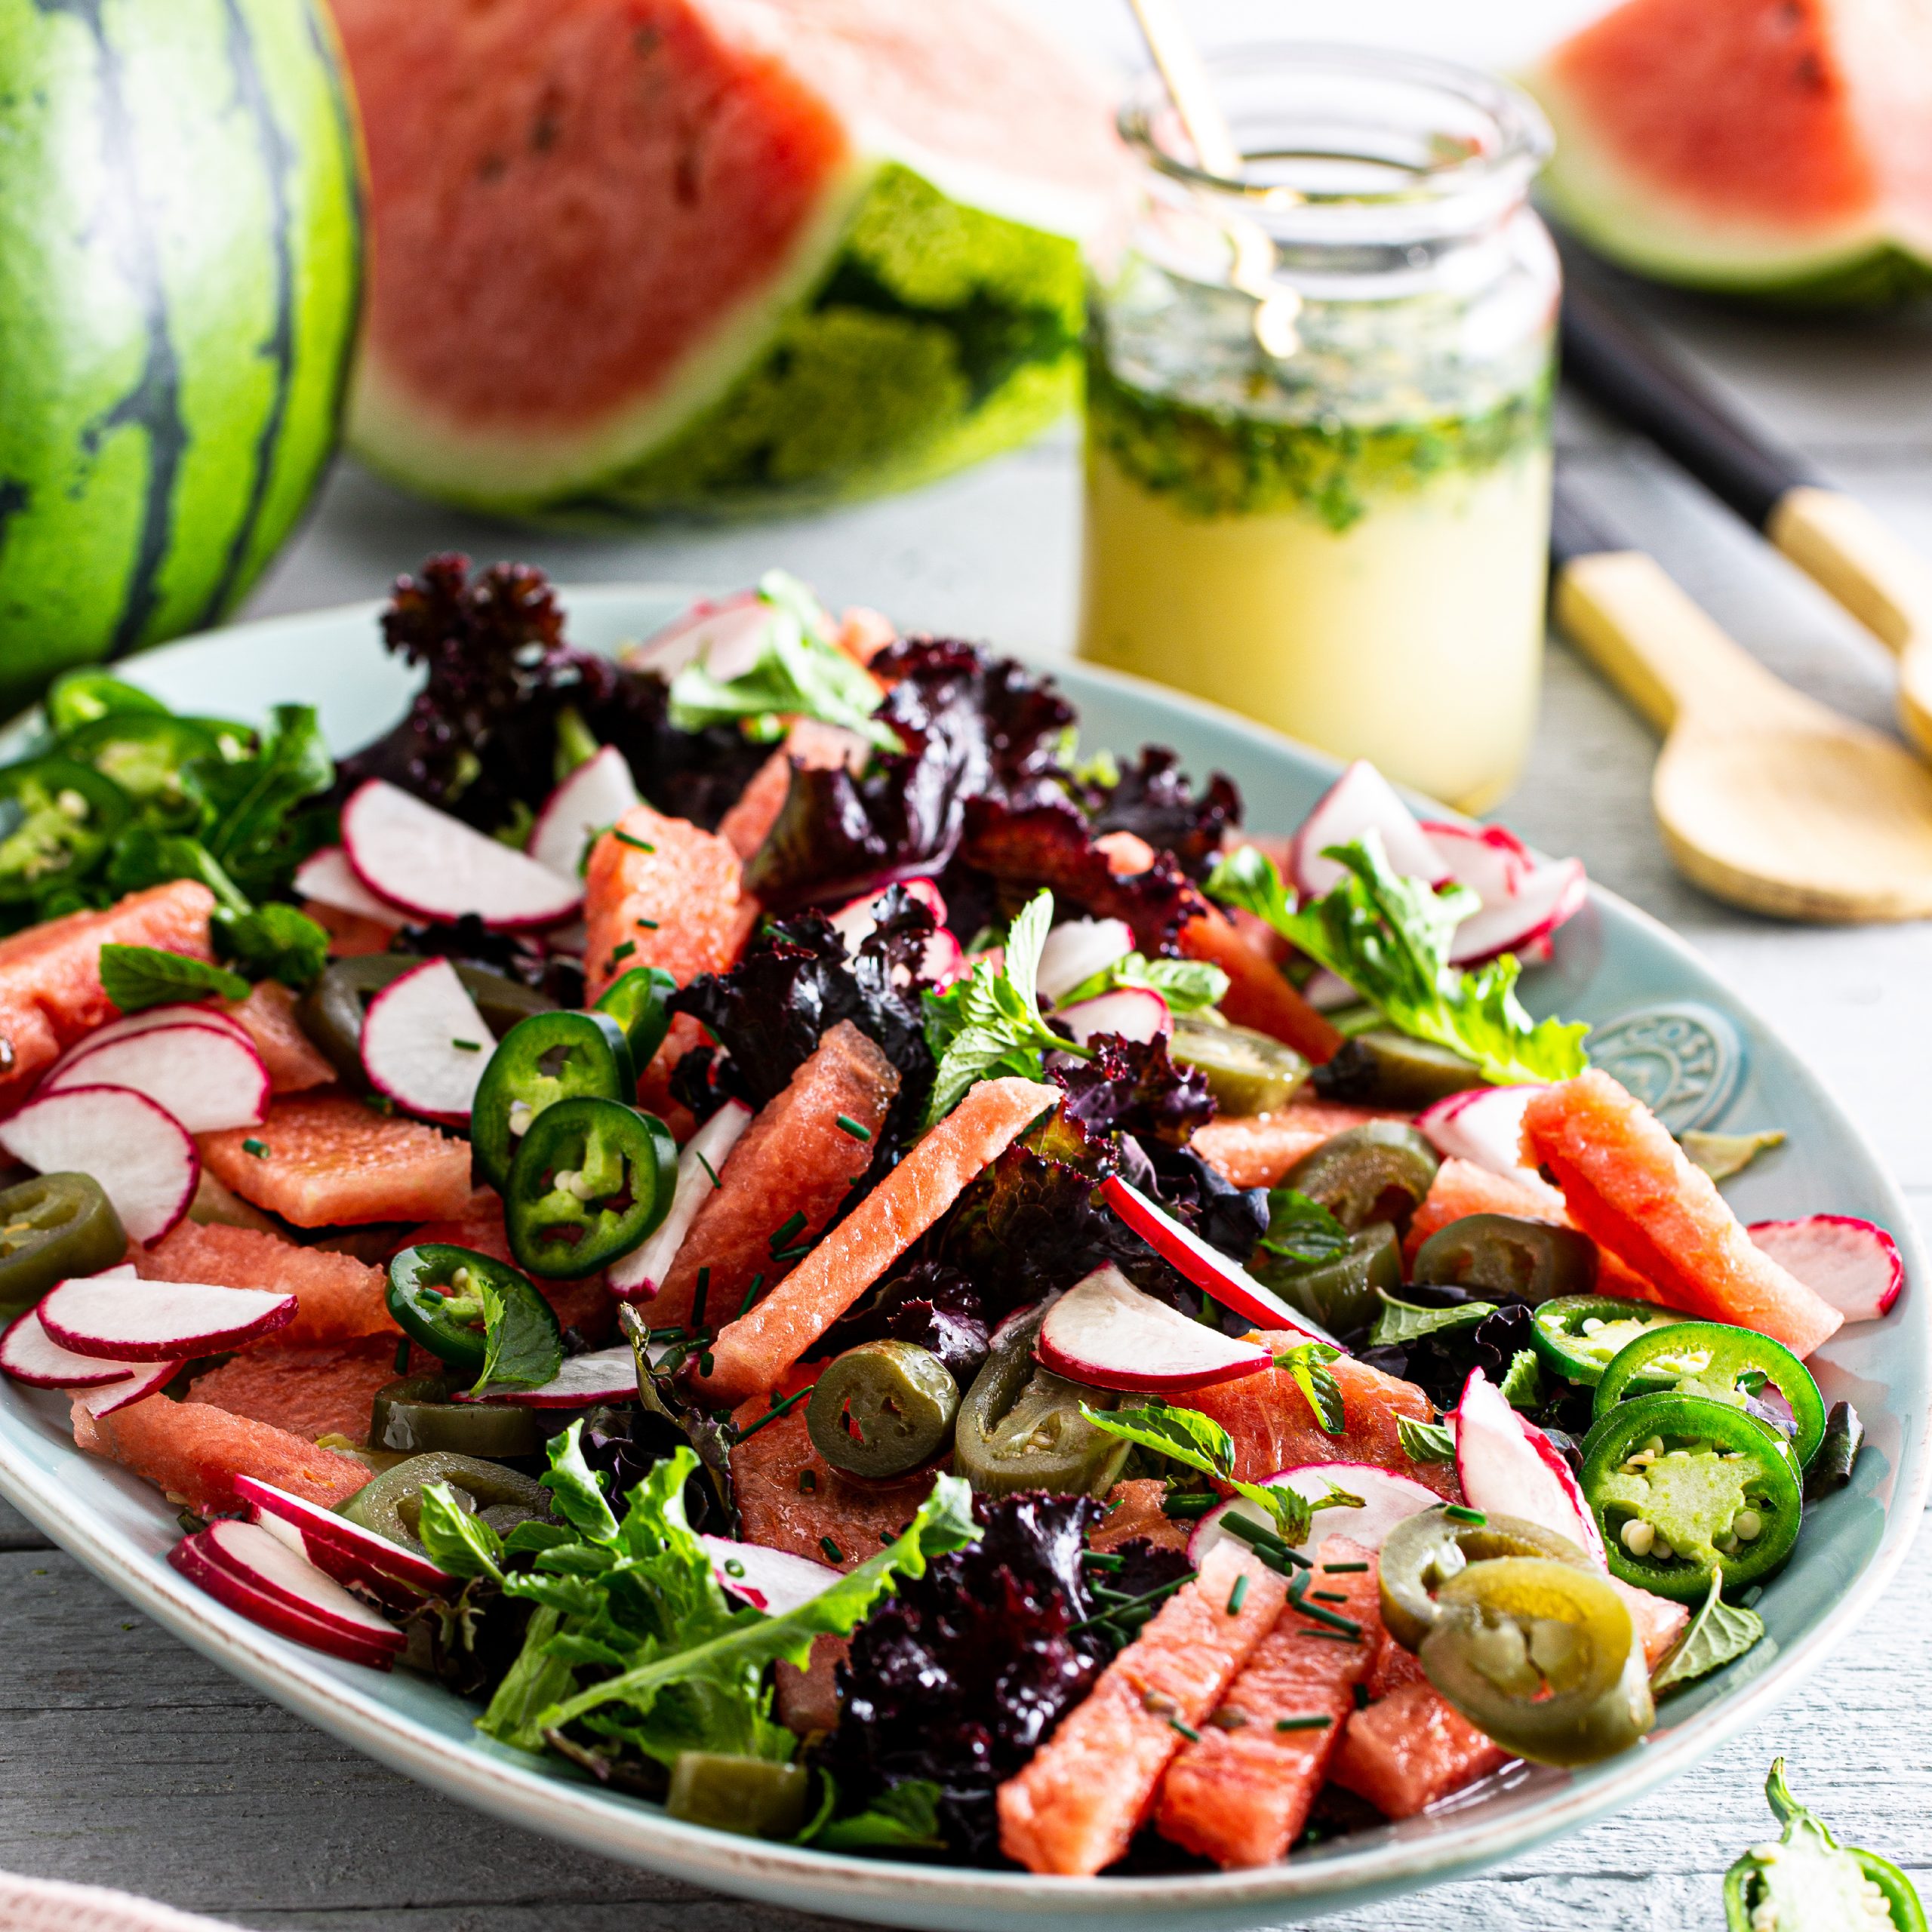 LEADERBRAND WATERMELON & CHILLI SALAD WITH LIME DRESSING RECIPE